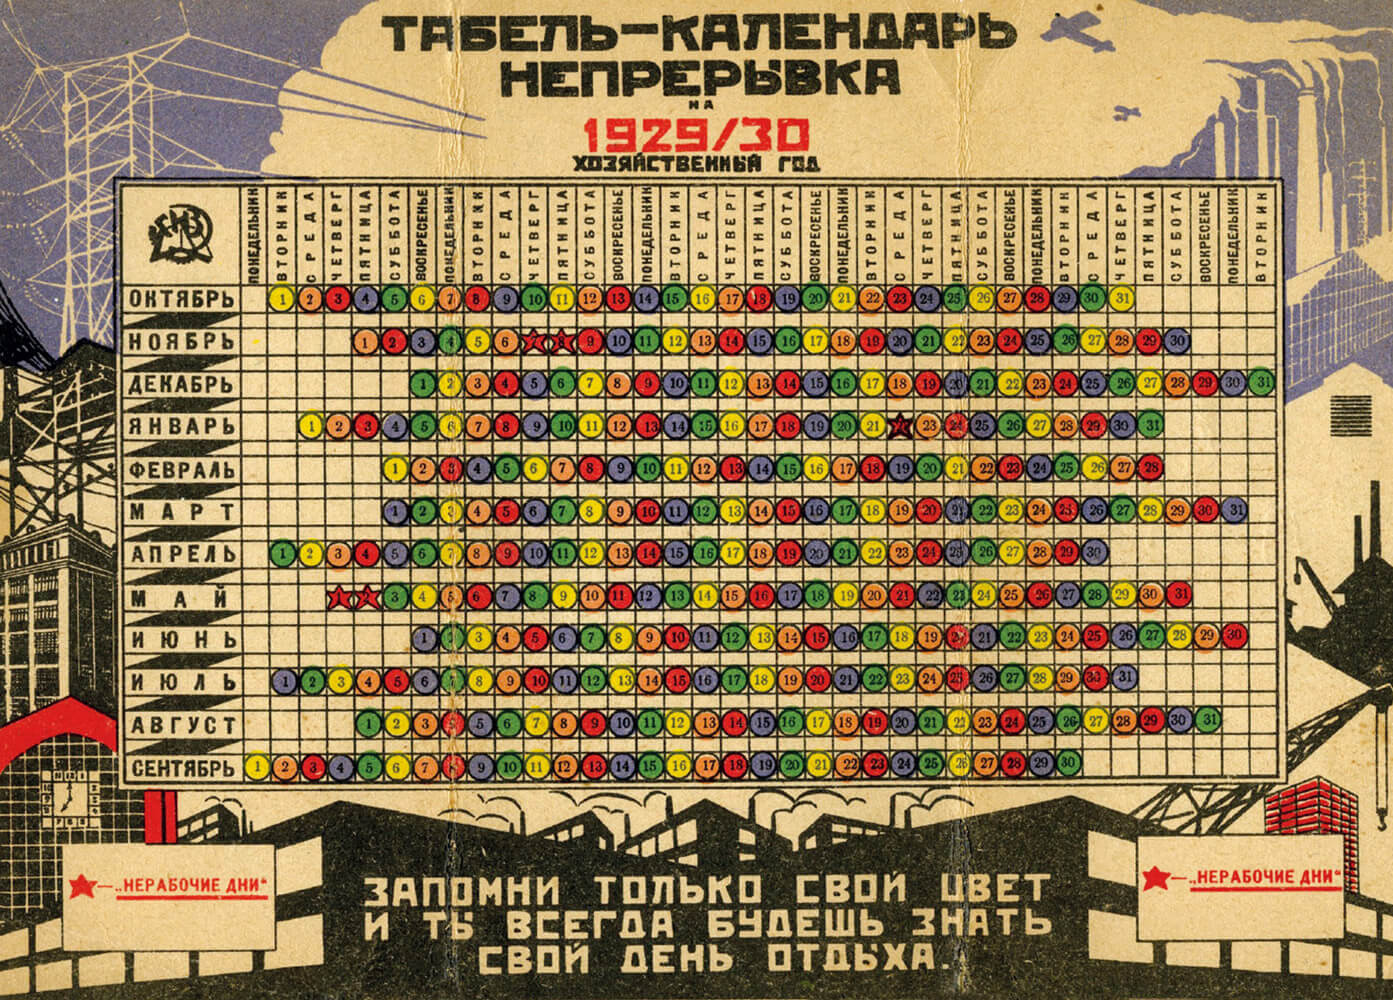 Calendar for 1929–1930 showing rest days for each of the five worker groups, designated here by different colors. In this version of nepreryvka, the continuous workweek, workers had every fifth day off. The text at bottom reads: “Just remember your color and you’ll always know your rest day.” The five days with red stars indicate official holidays on which no one worked. Courtesy Erast Butakov.